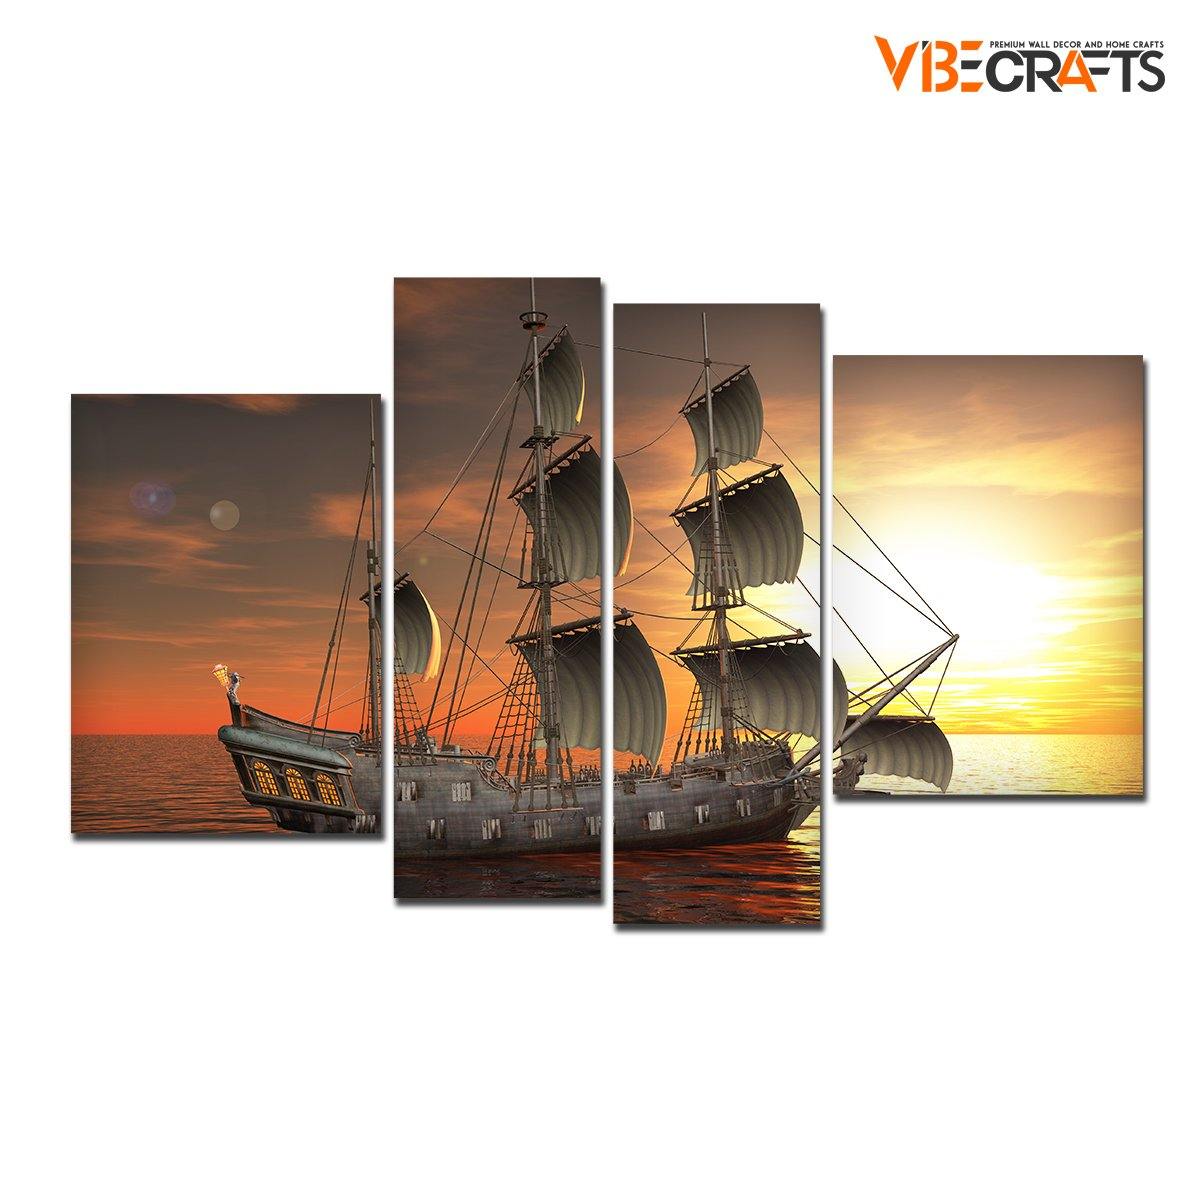 A Sailing Boat 4 Pieces Premium Wall Painting - Vibecrafts